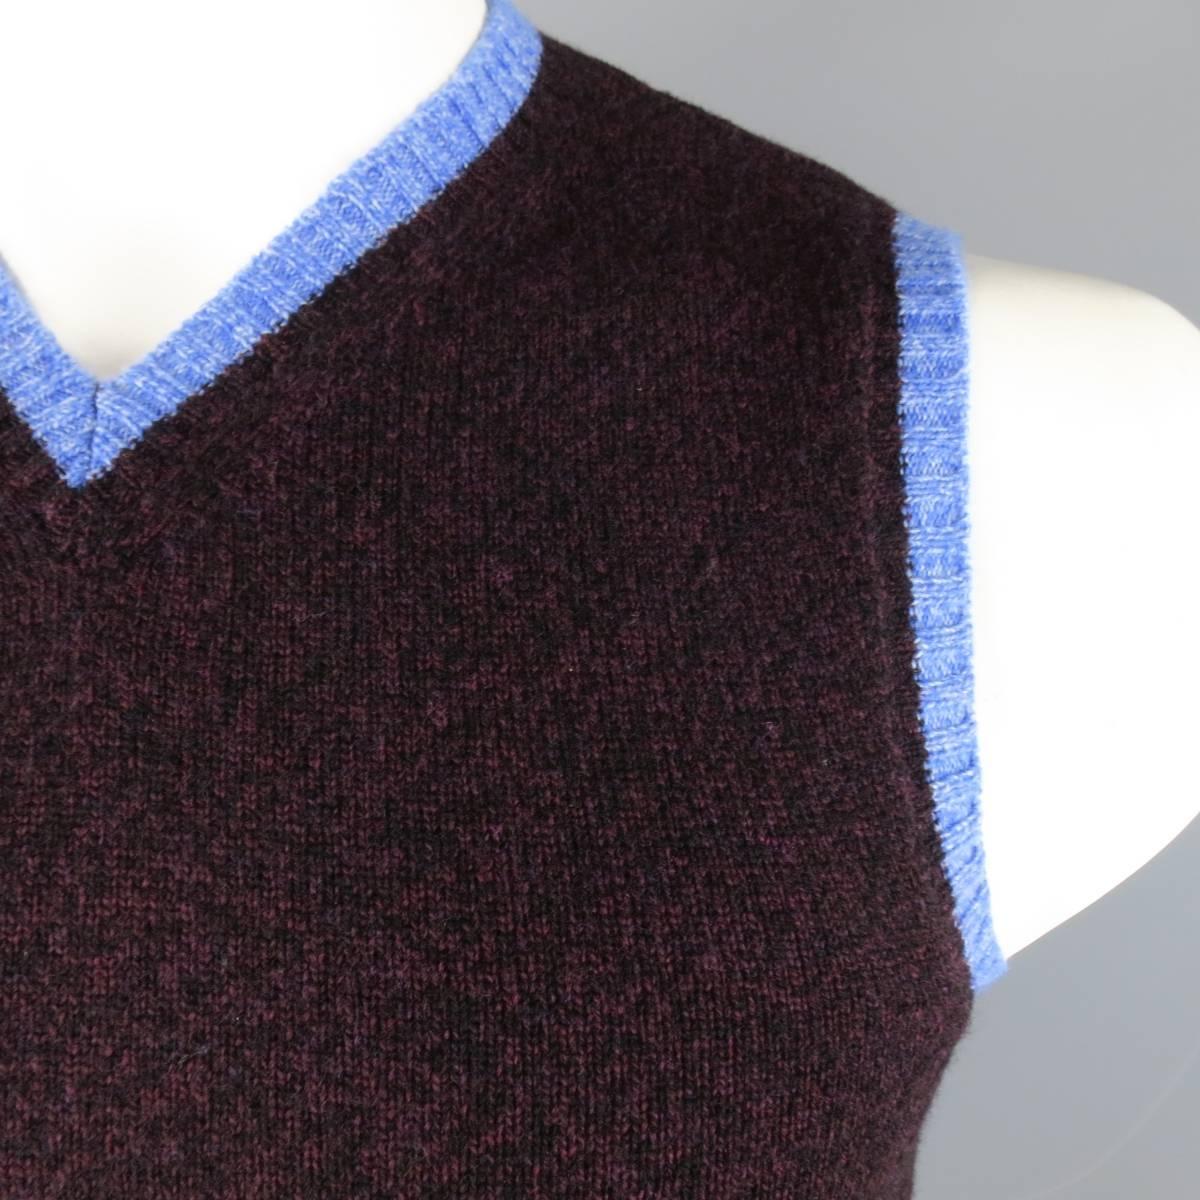 ETRO Vest consists of merino wool material in a burgundy color tone. Designed in a v-neck collar, color blocked with blue accents. Detailed in a heather pattern. Made in Italy.
 
Excellent Pre-Owned Condition
Marked Size: M
 
Measurements
